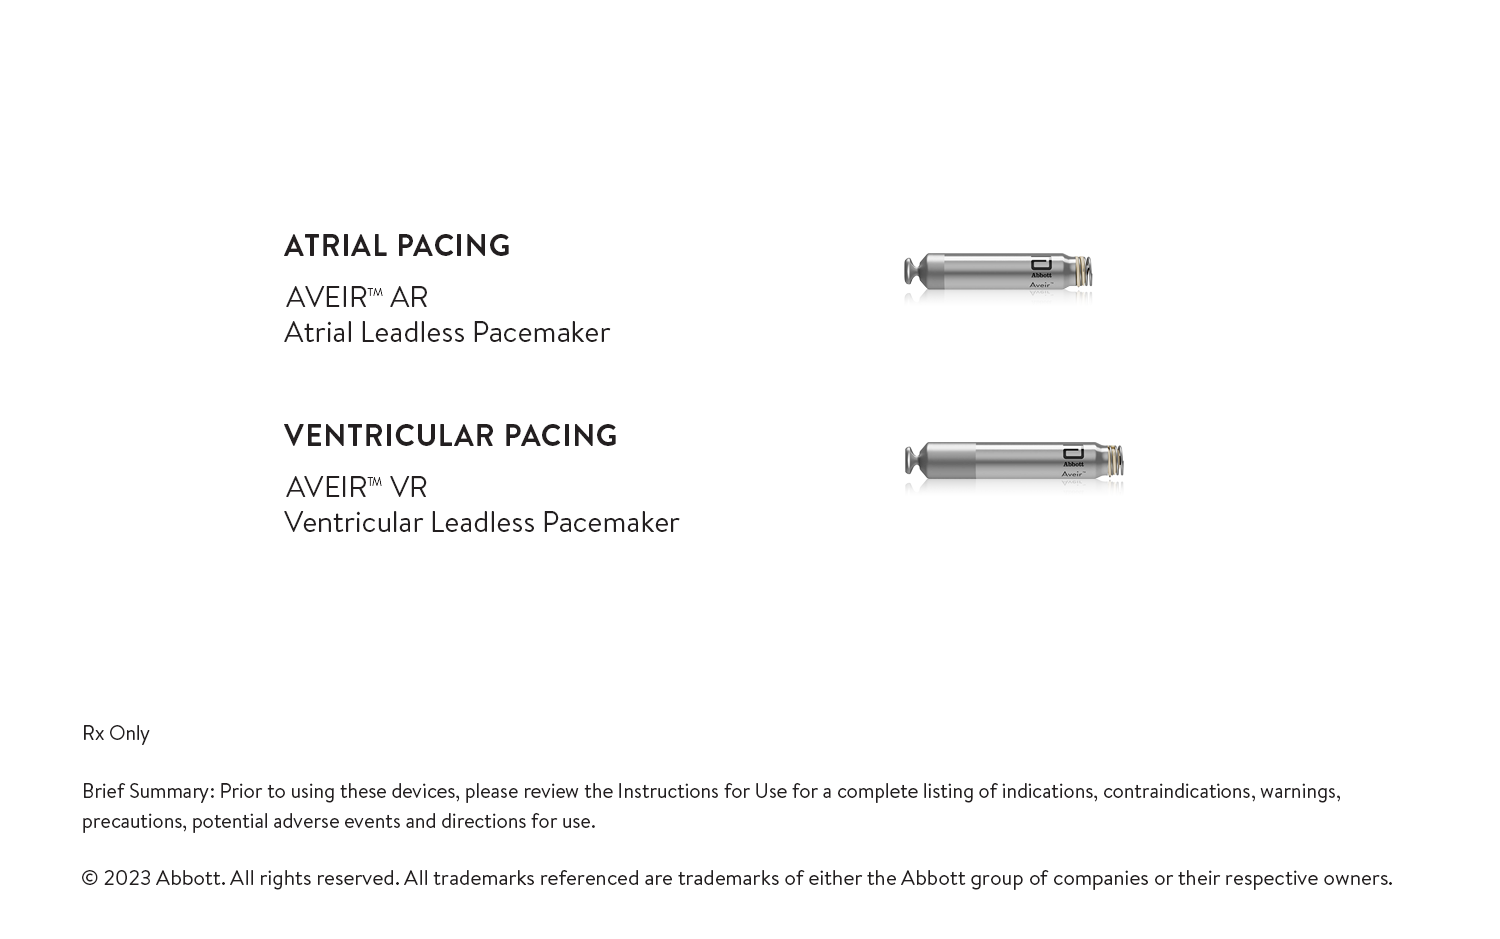 AVEIR DR Components